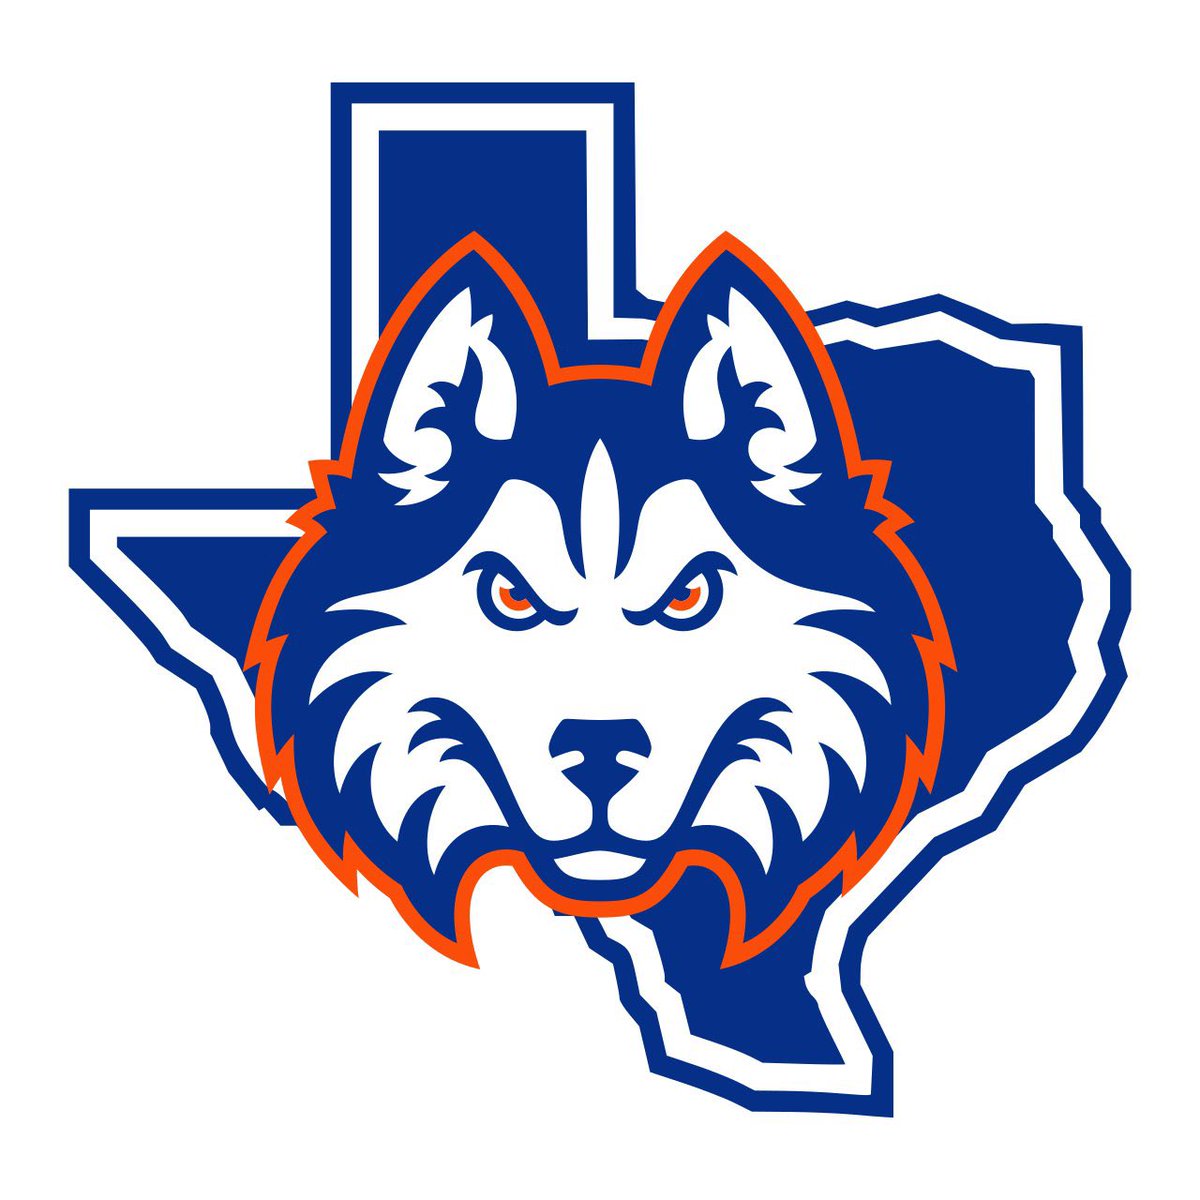 Great 1️⃣st year on the camp tour!!! 4️⃣camps in 4️⃣days covering the state of TEXAS!!!! Offers were given at every camp!!! Thanks to all that came!!!

#DawgsUp 
#NewEra